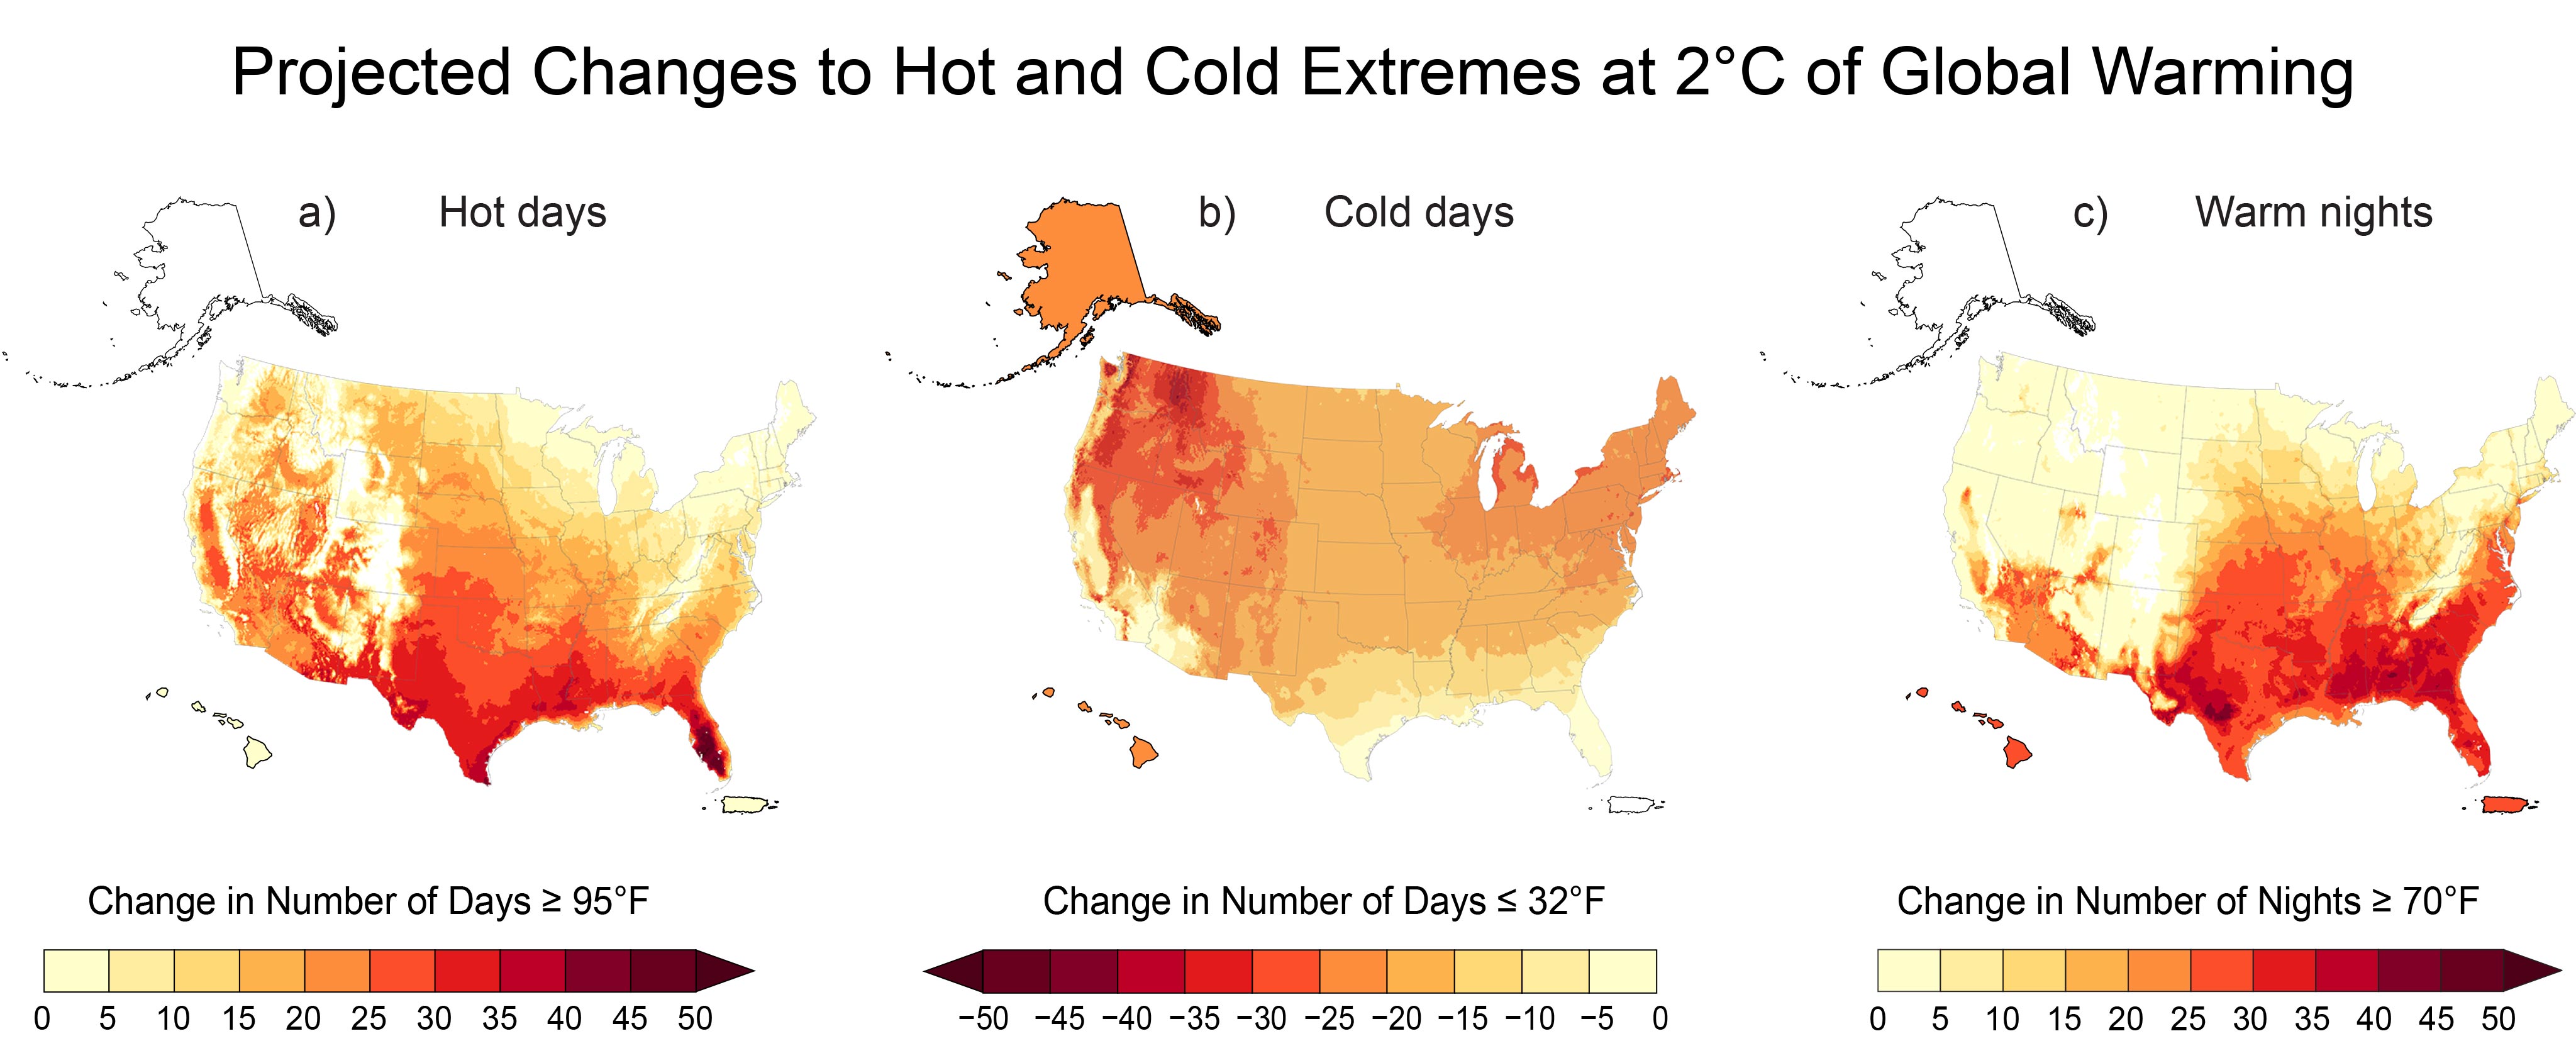 Projected Changes to Hot and Cold Extremes at 2°C of Global Warming